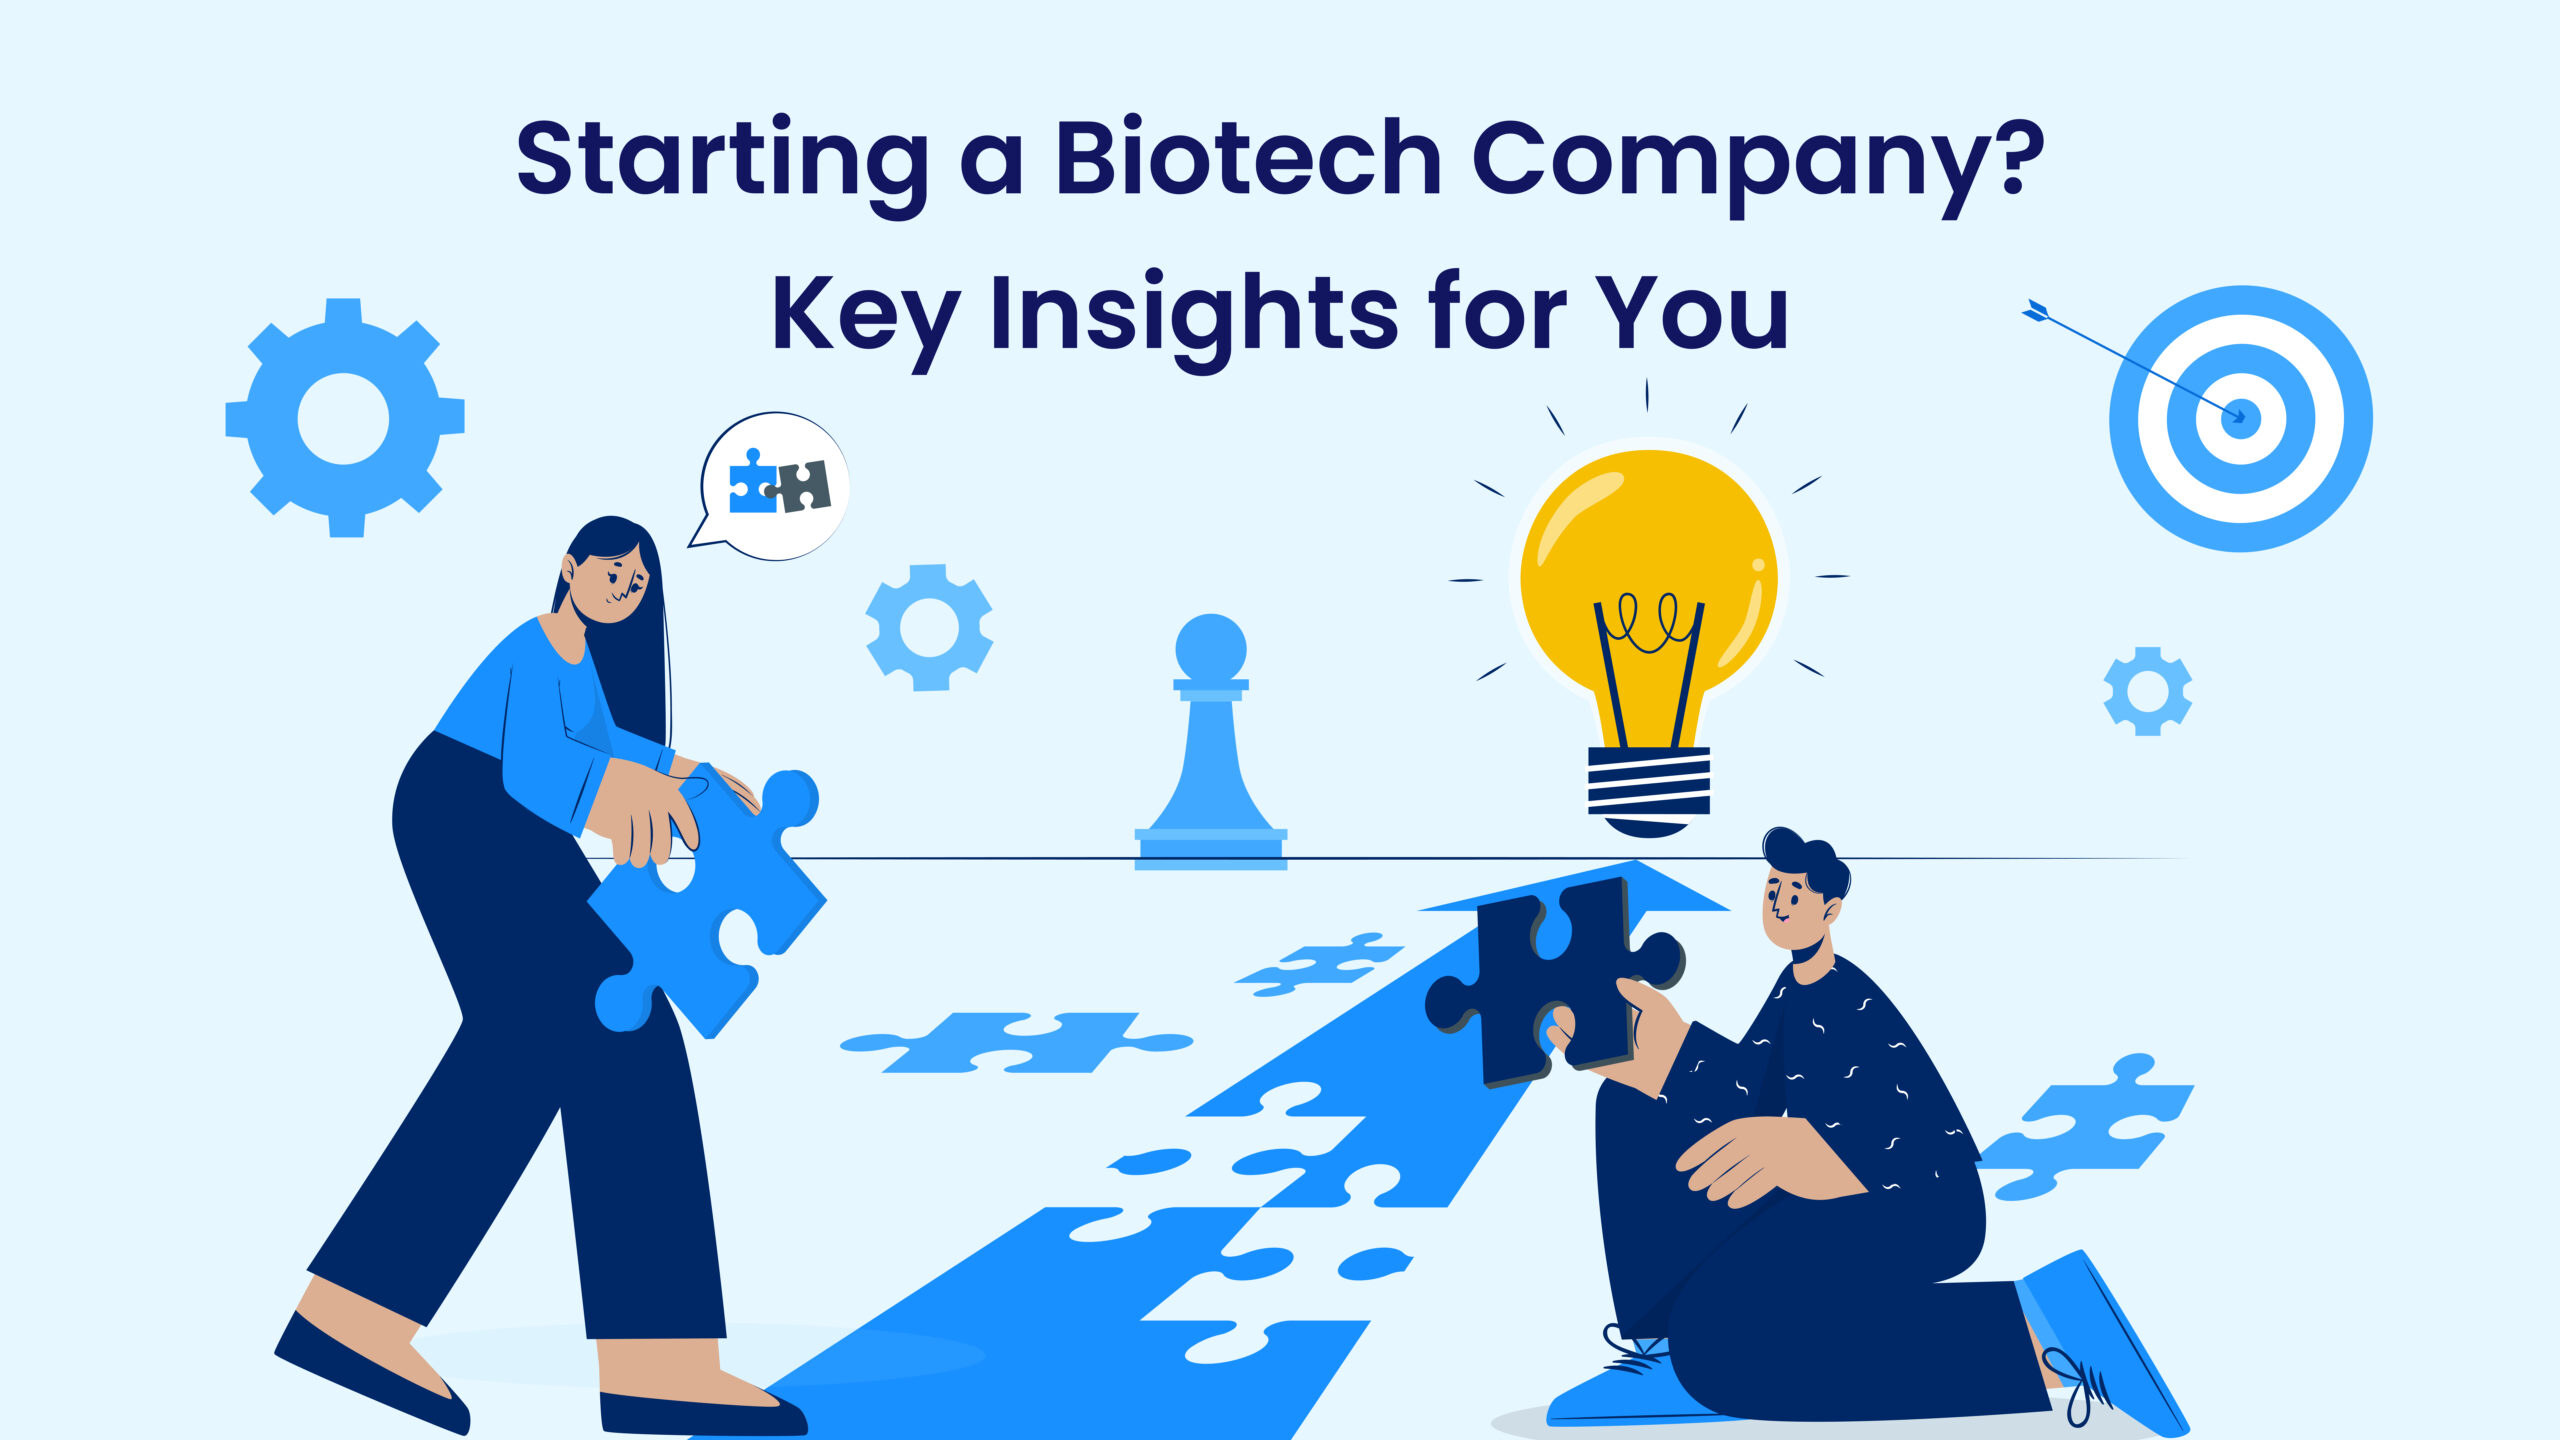 Interested in starting a biotech company? Here’s what you need to know